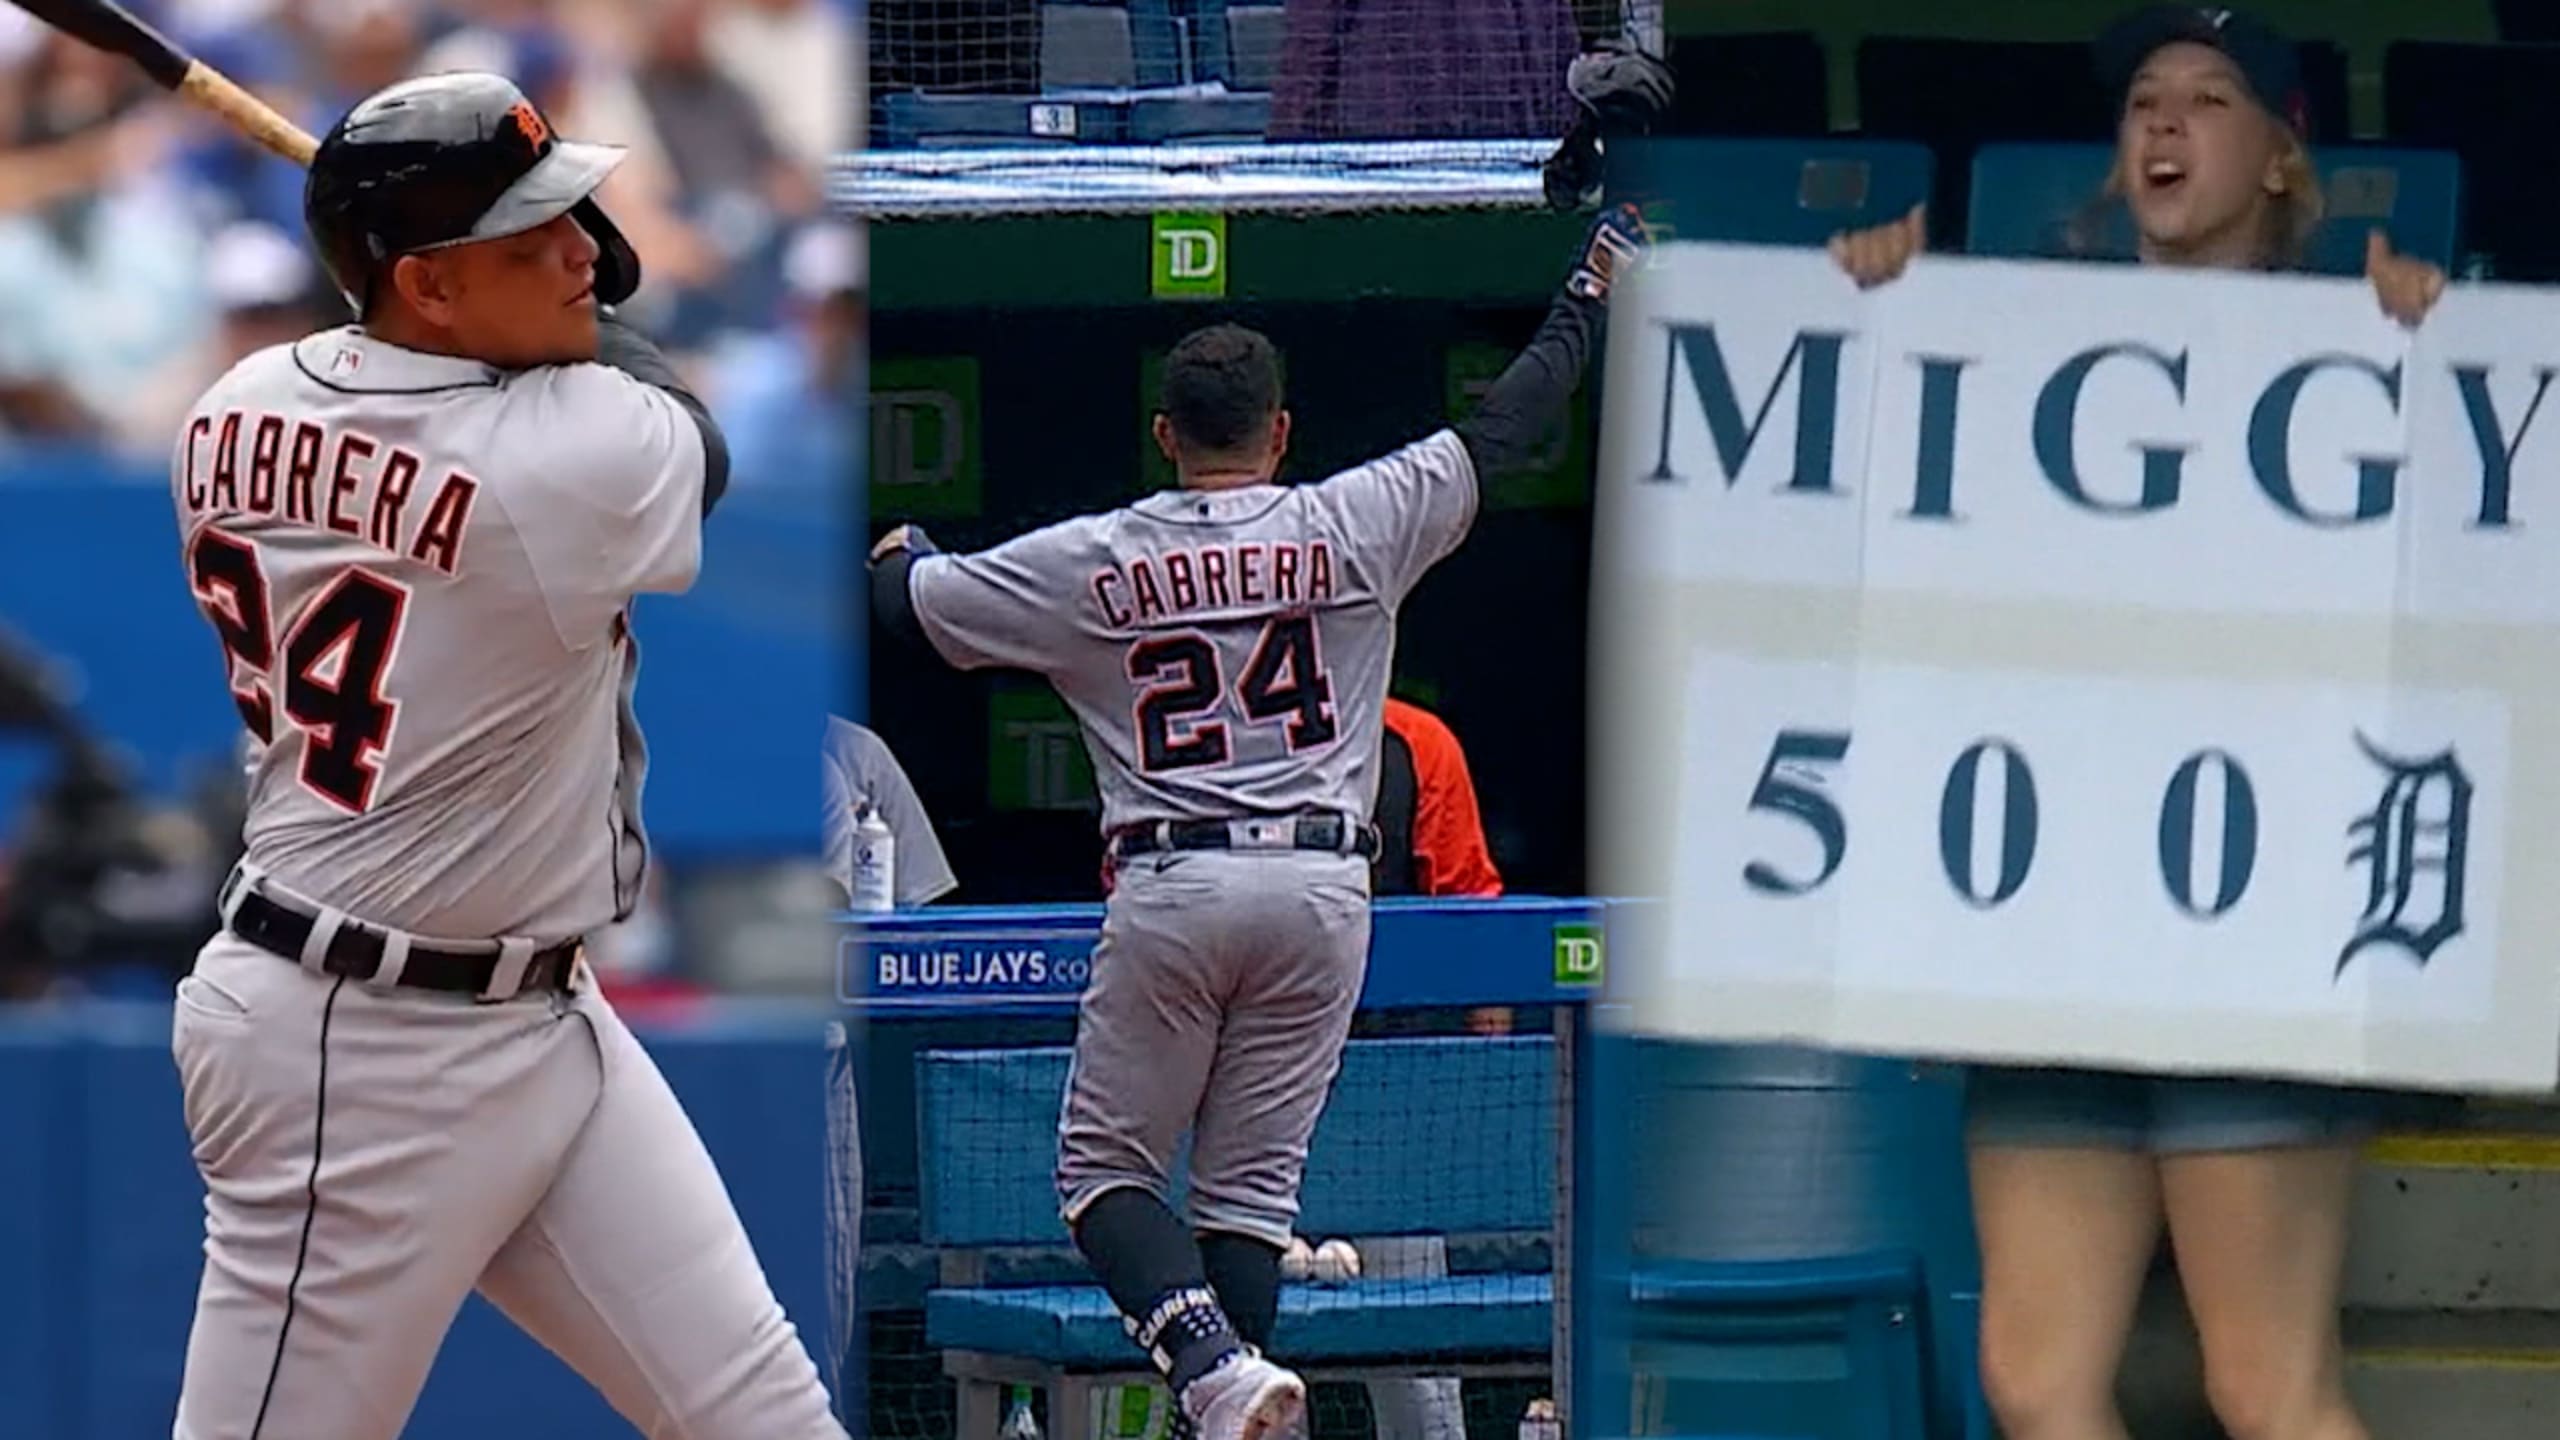 Miguel Cabrera 500TH HOME RUN OF CAREER 👏🐅(Tigers/Blue Jays